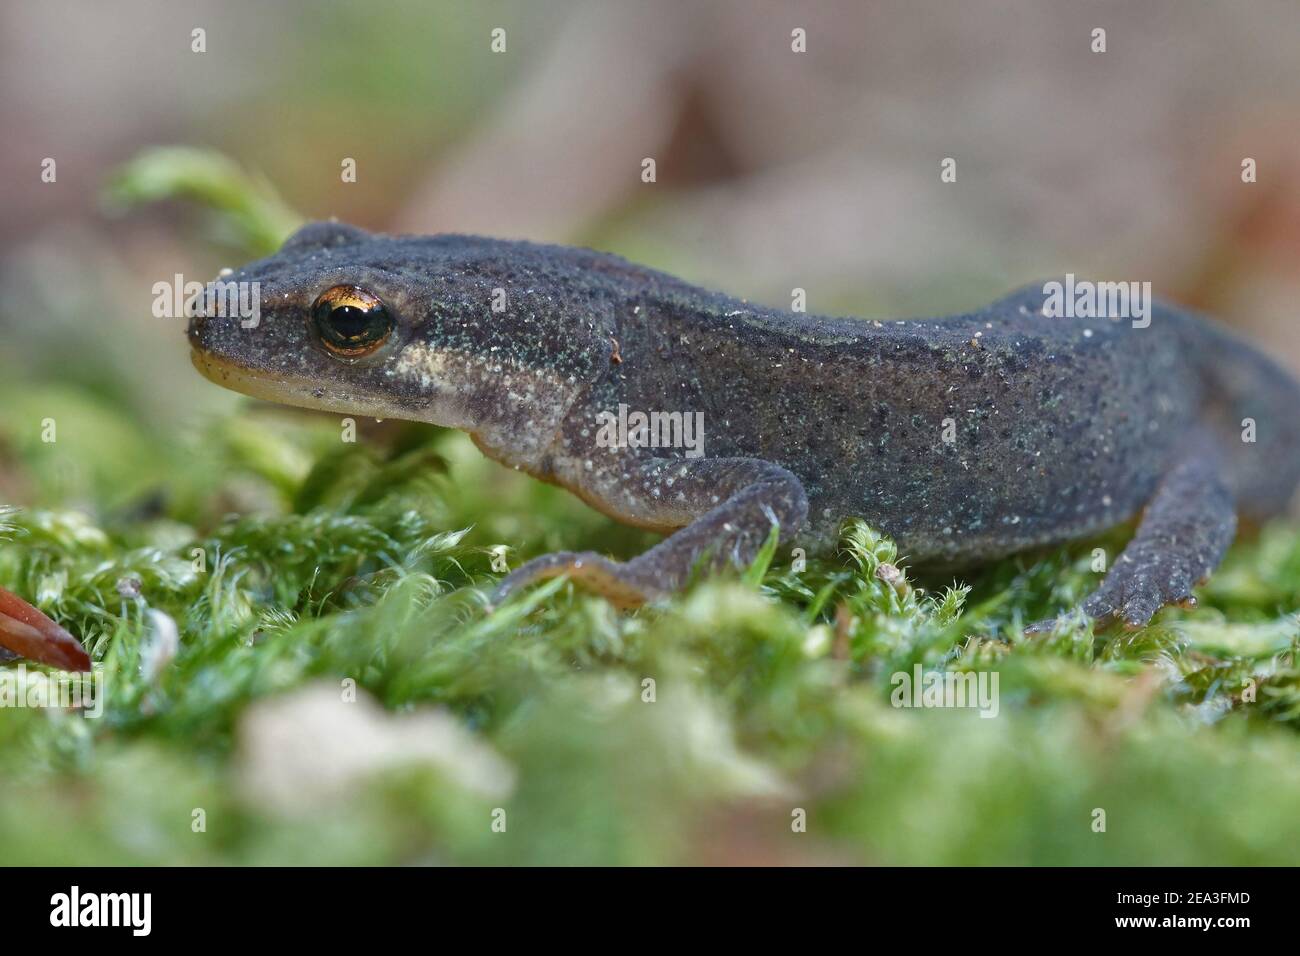 An adult male smooth new , Lissotriton vulgaris on green moss Stock Photo